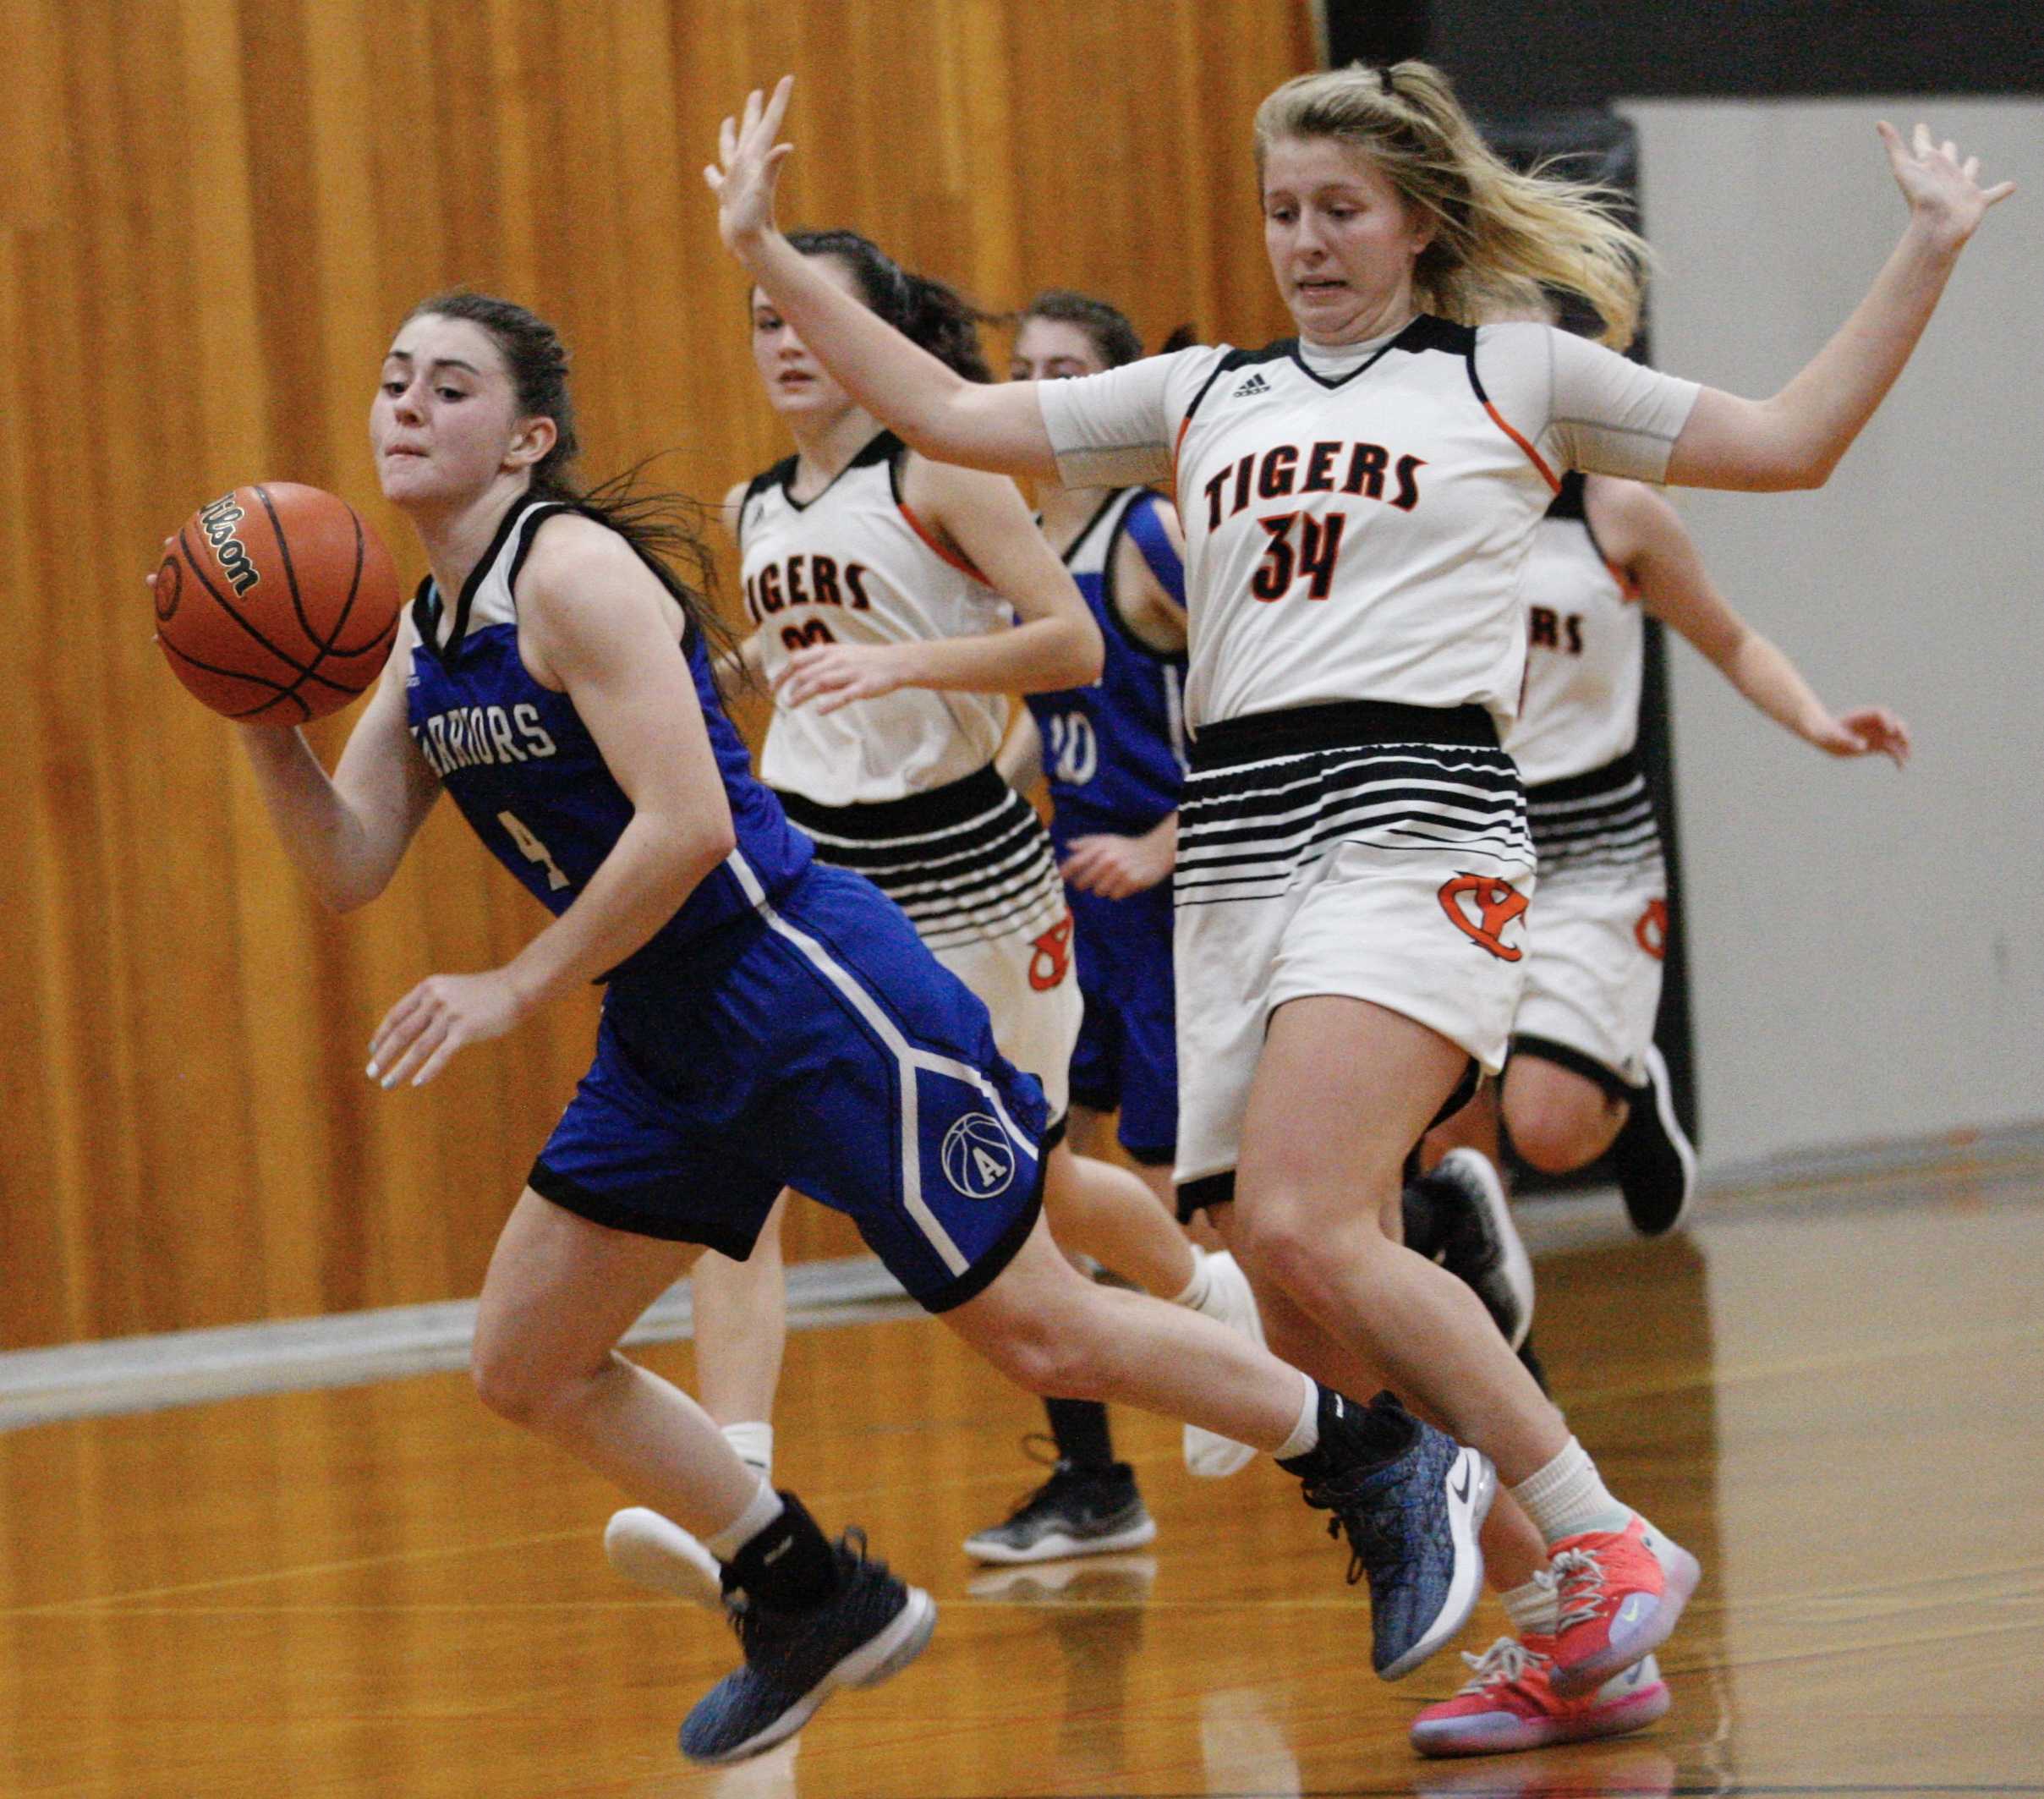 Amity's Keeley Graham (left) goes flying after getting tripped up by Yamhill-Carlton's Sadie Horne on Tuesday night.